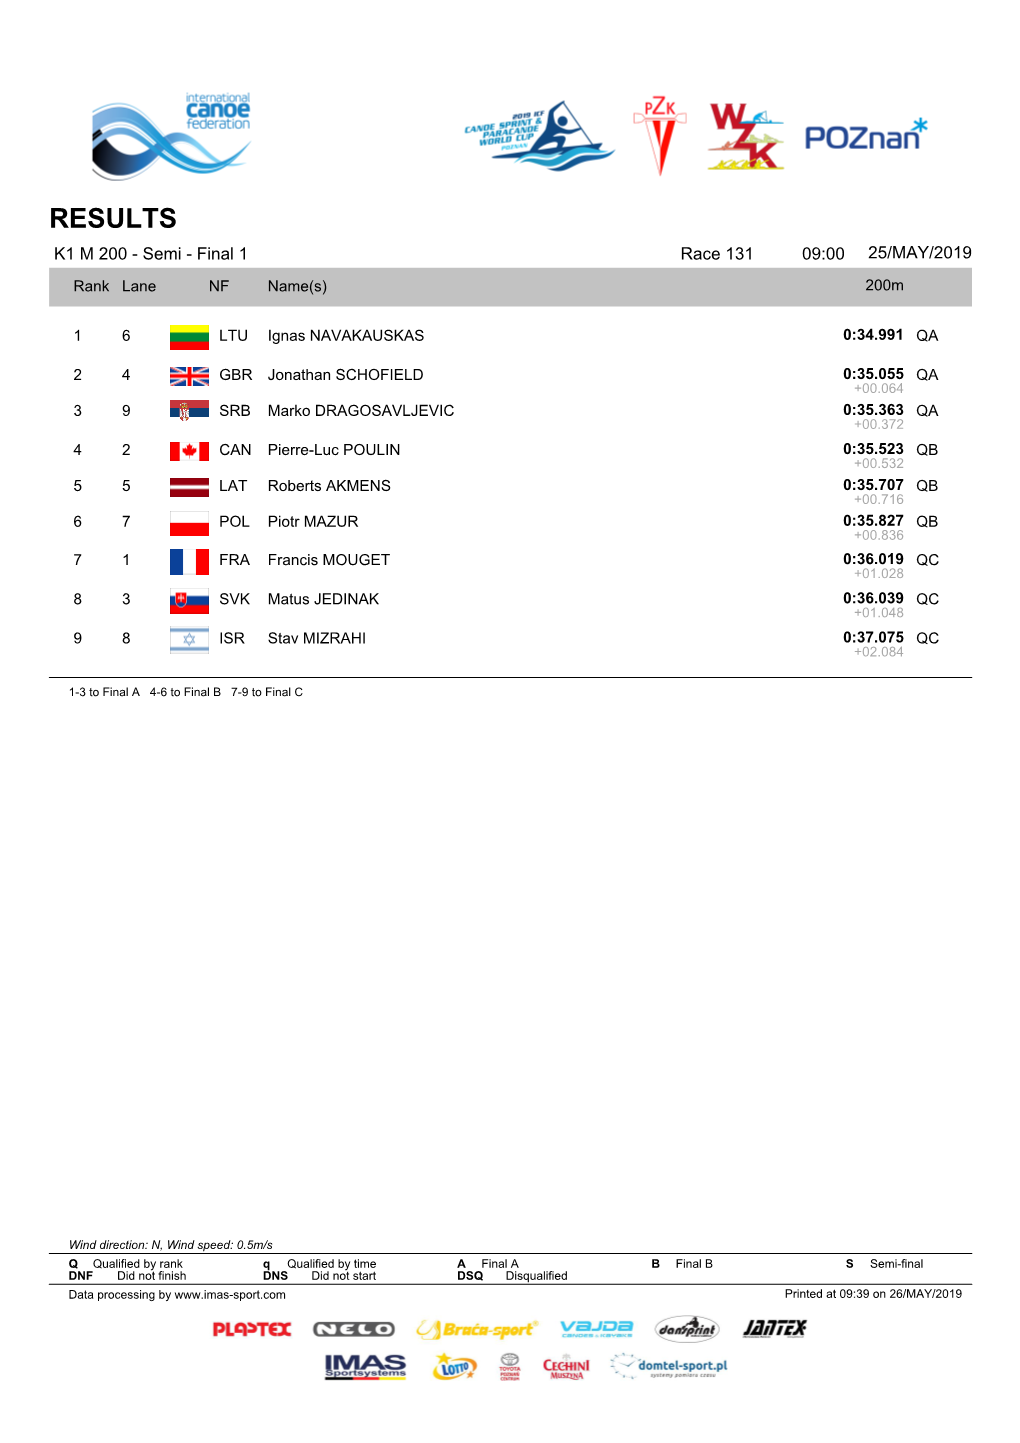 RACE RESULTS KL3 M 200 - Final Race 145 10:25 25/MAY/2019